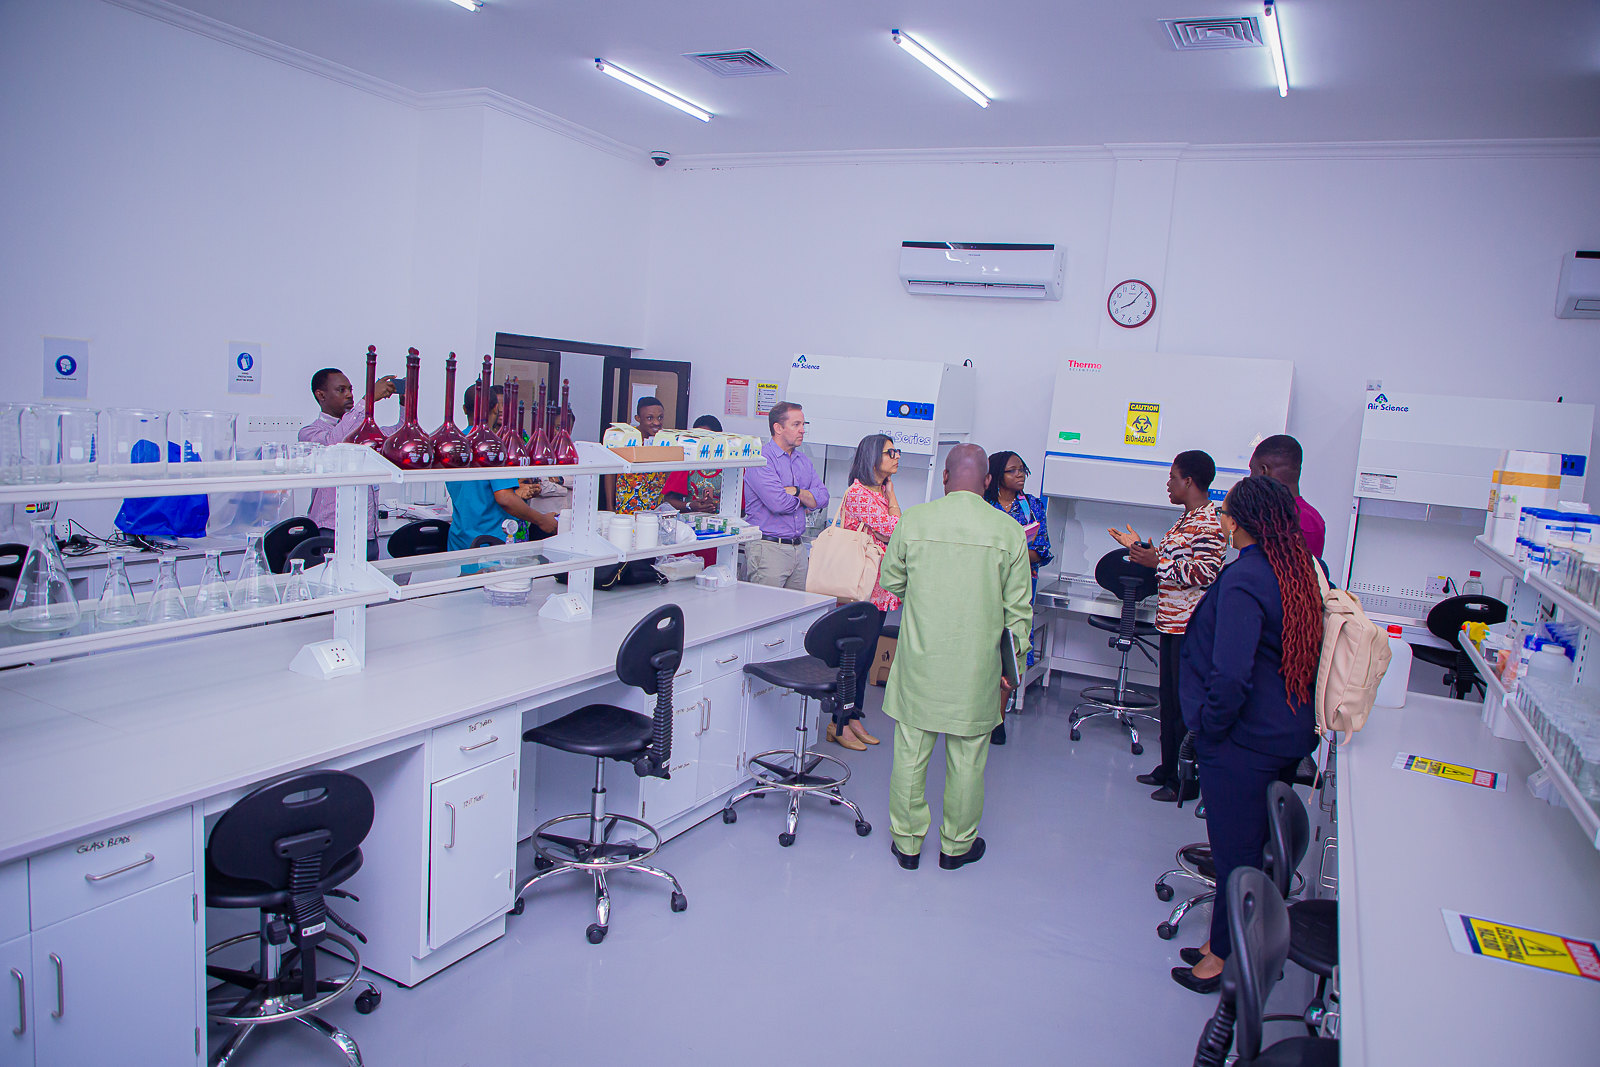 The team touring the state-of-the-art scientific laboratories built under the ACE Impact project at the University of Ghana